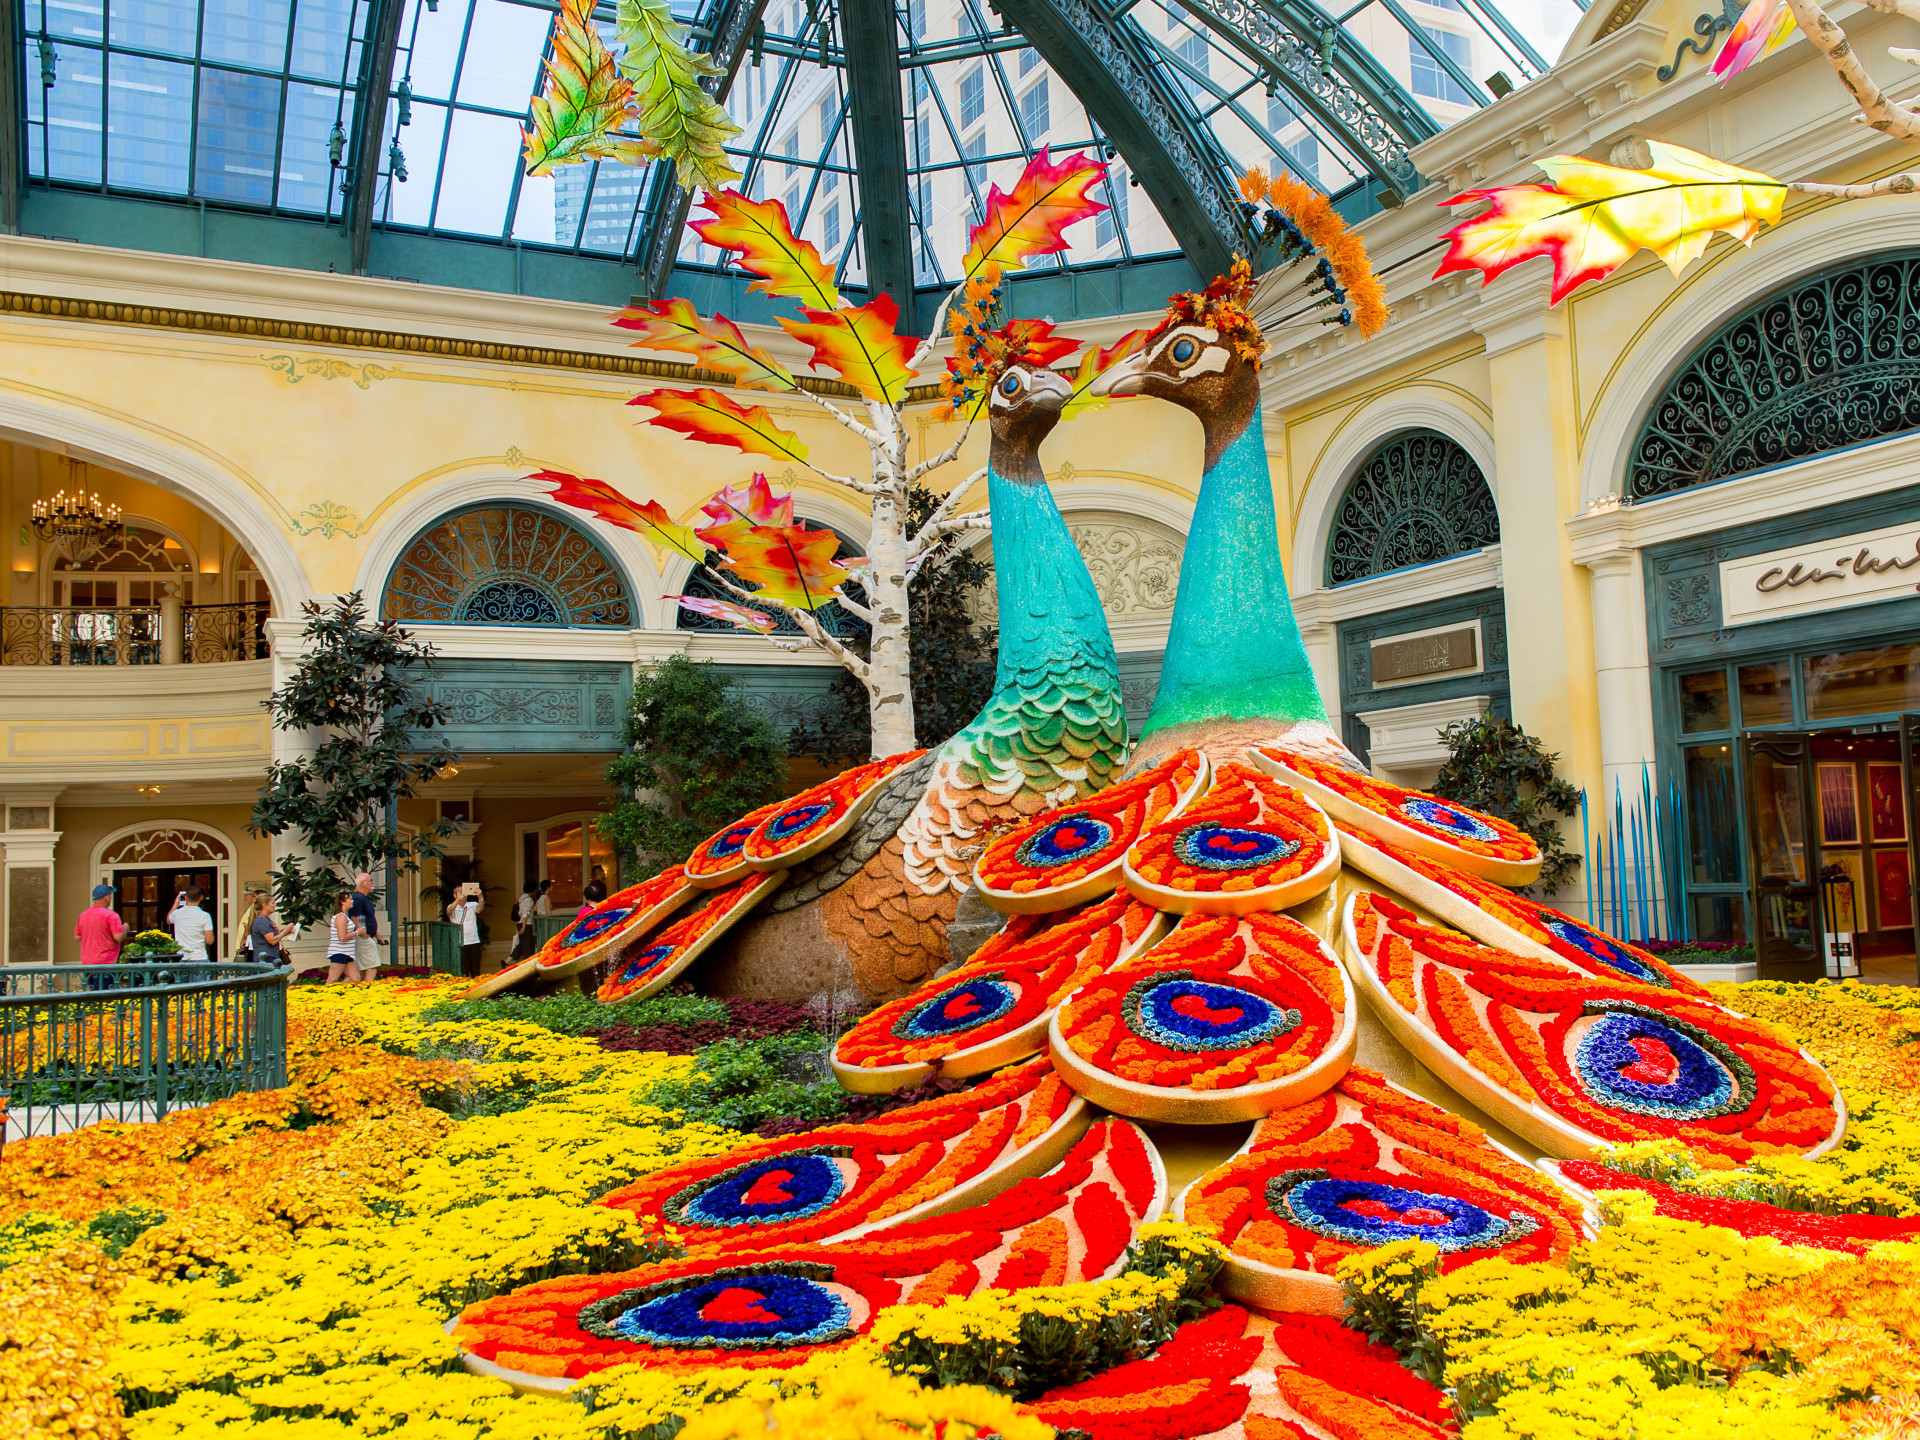 Fantasies come to life at these glorious gardens inside the luxurious Bellagio Hotel in Las Vegas. Here thousands of flowers are harvested and transformed into mesmerizing works of art beyond your wildest dreams.<p><a href="https://www.msn.com/en-us/community/channel/vid-7xx8mnucu55yw63we9va2gwr7uihbxwc68fxqp25x6tg4ftibpra?cvid=94631541bc0f4f89bfd59158d696ad7e">Follow us and access great exclusive content every day</a></p>